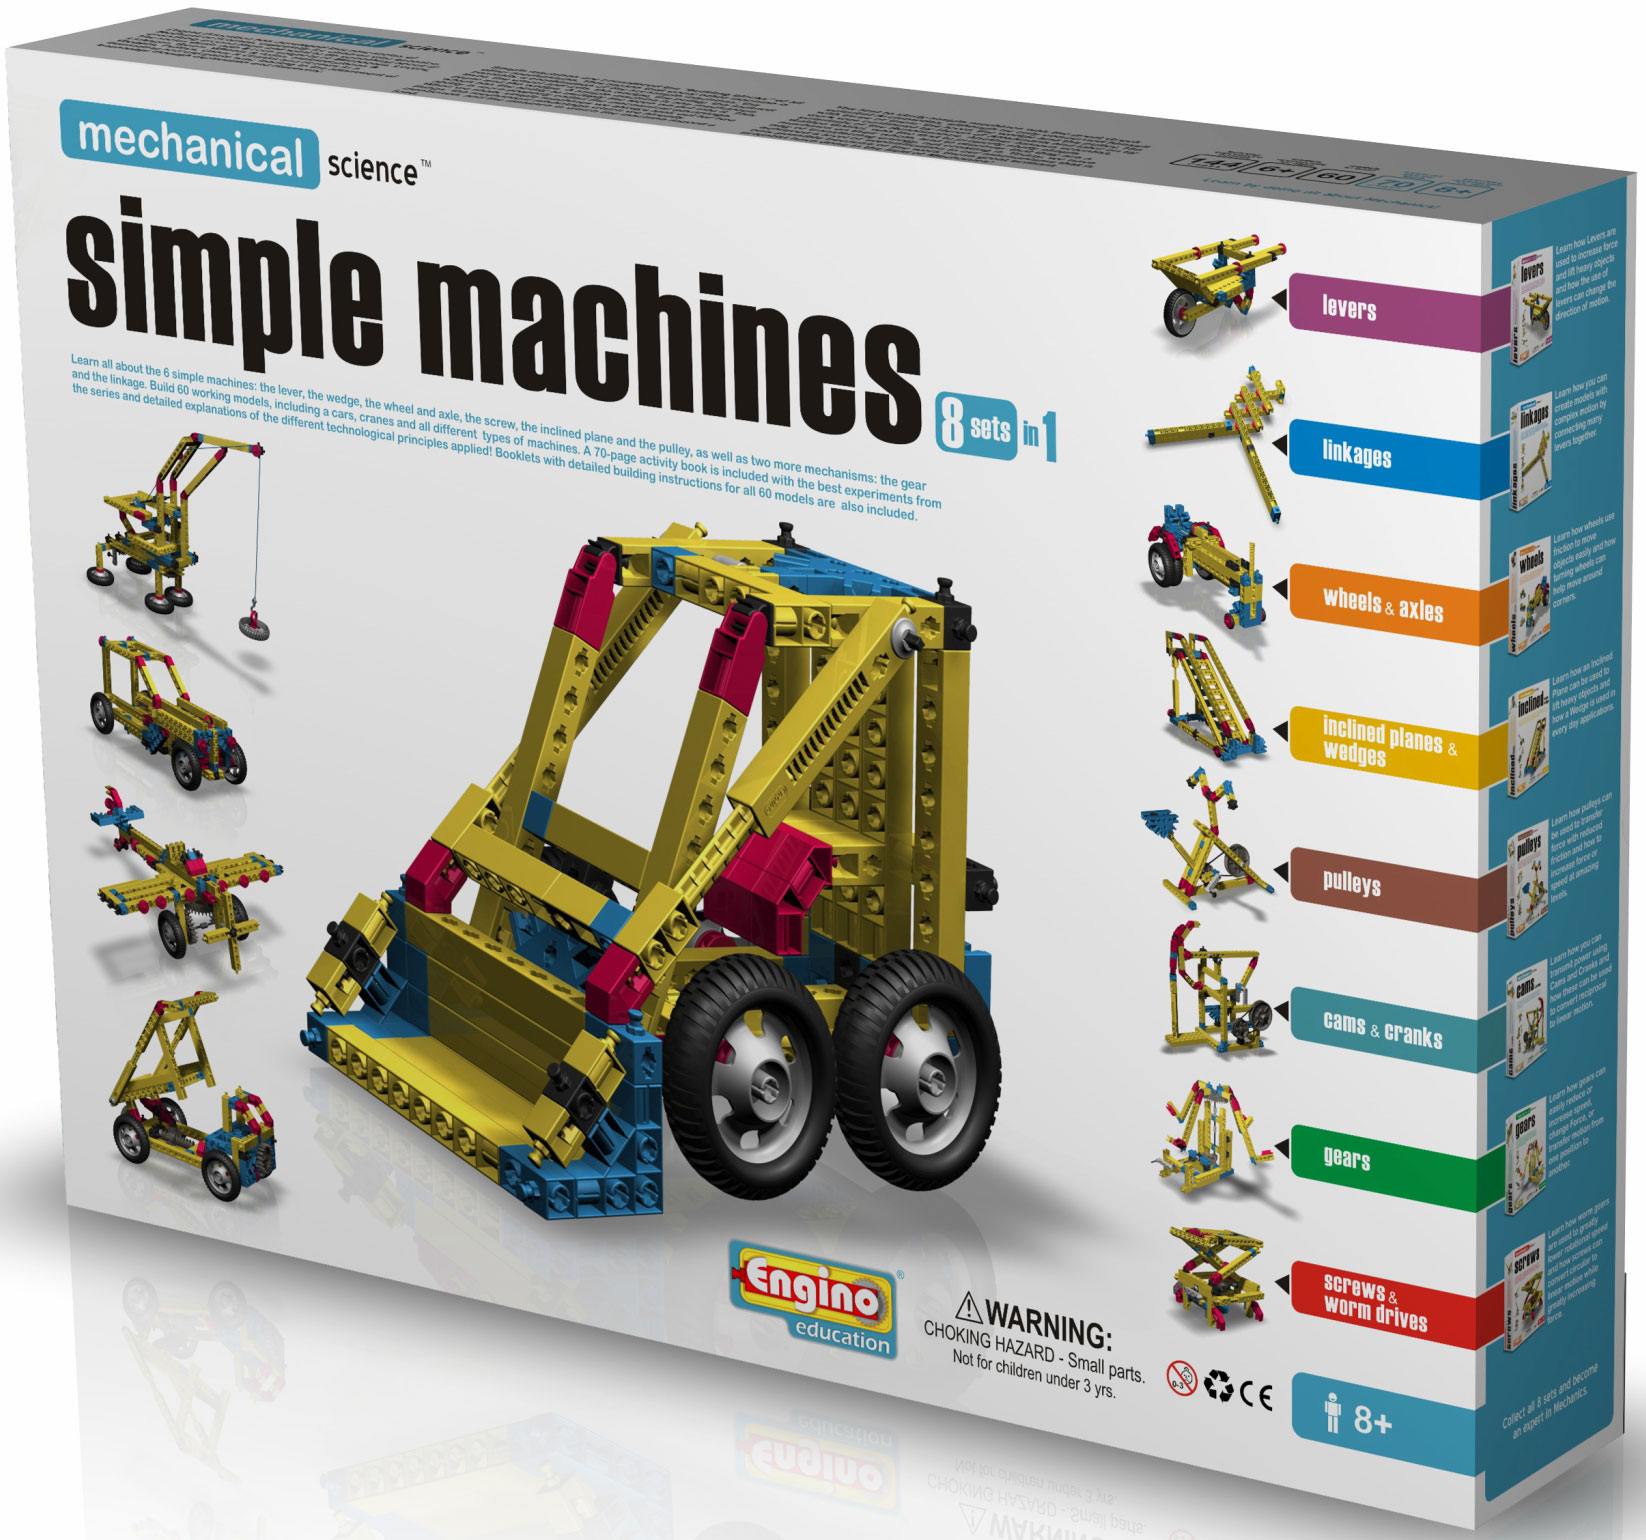 Simple Machines 8 sets in 1